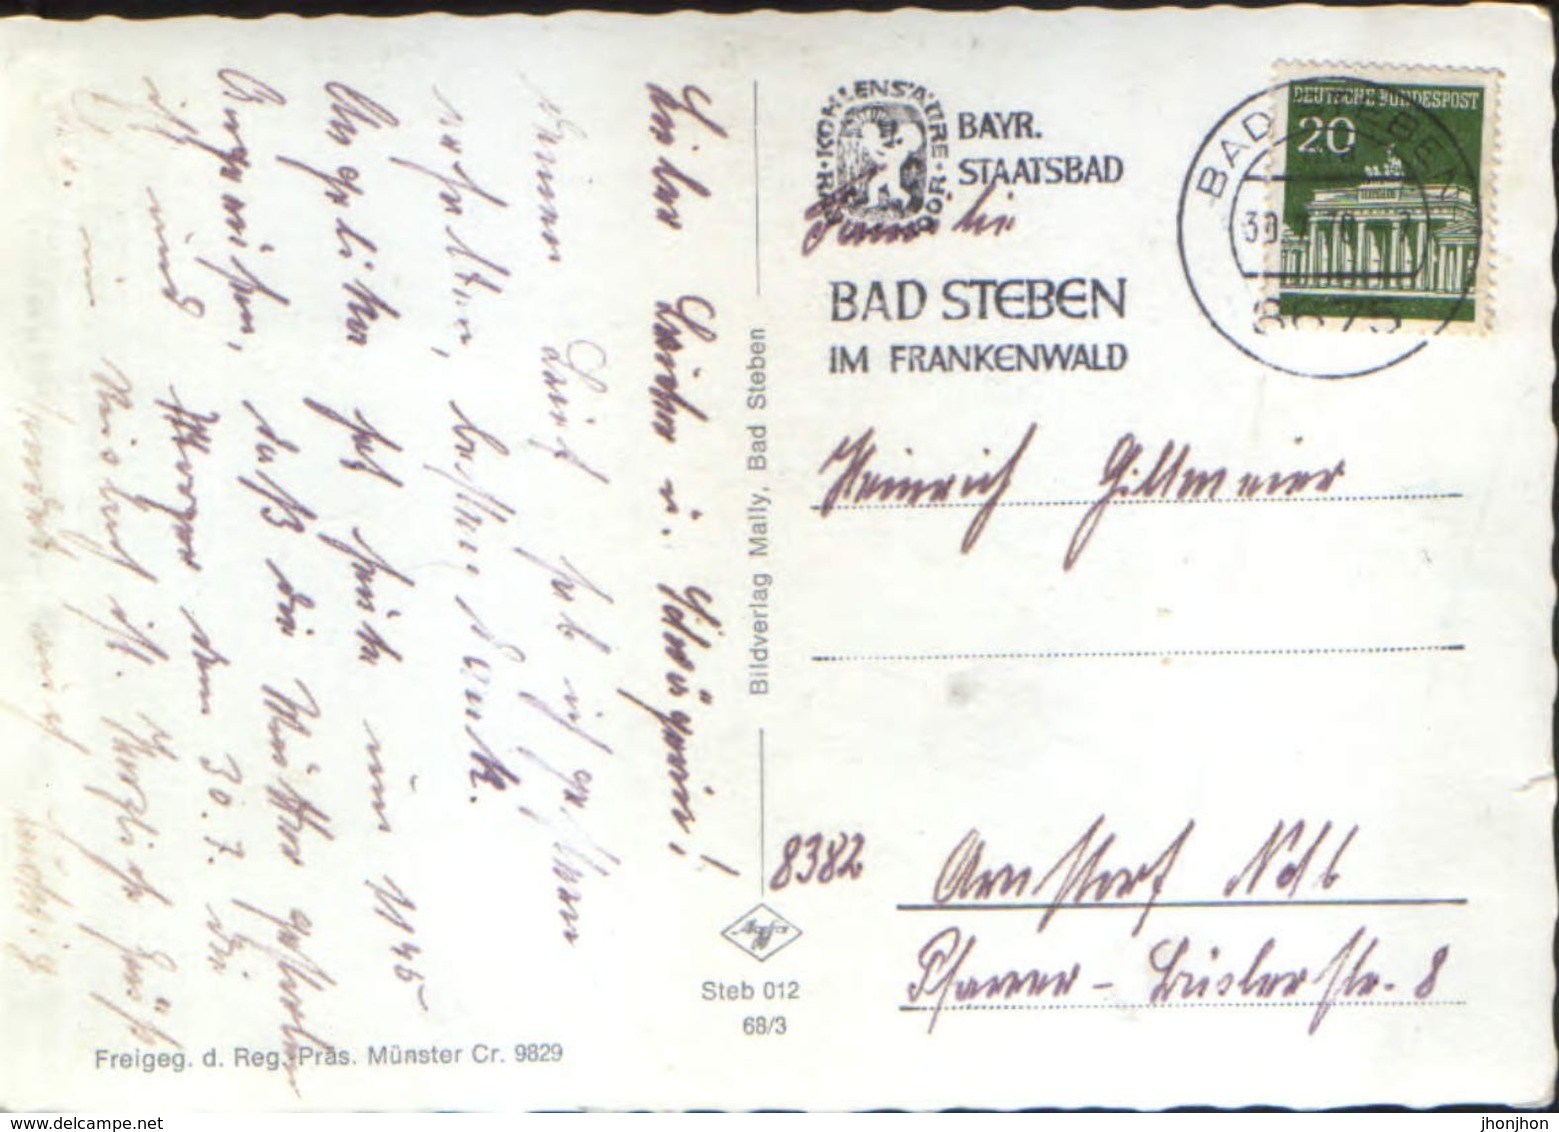 Germany - Postcard Circulated In 1970 - Bad Steben - General View Partial  - 2/scan - Bad Steben